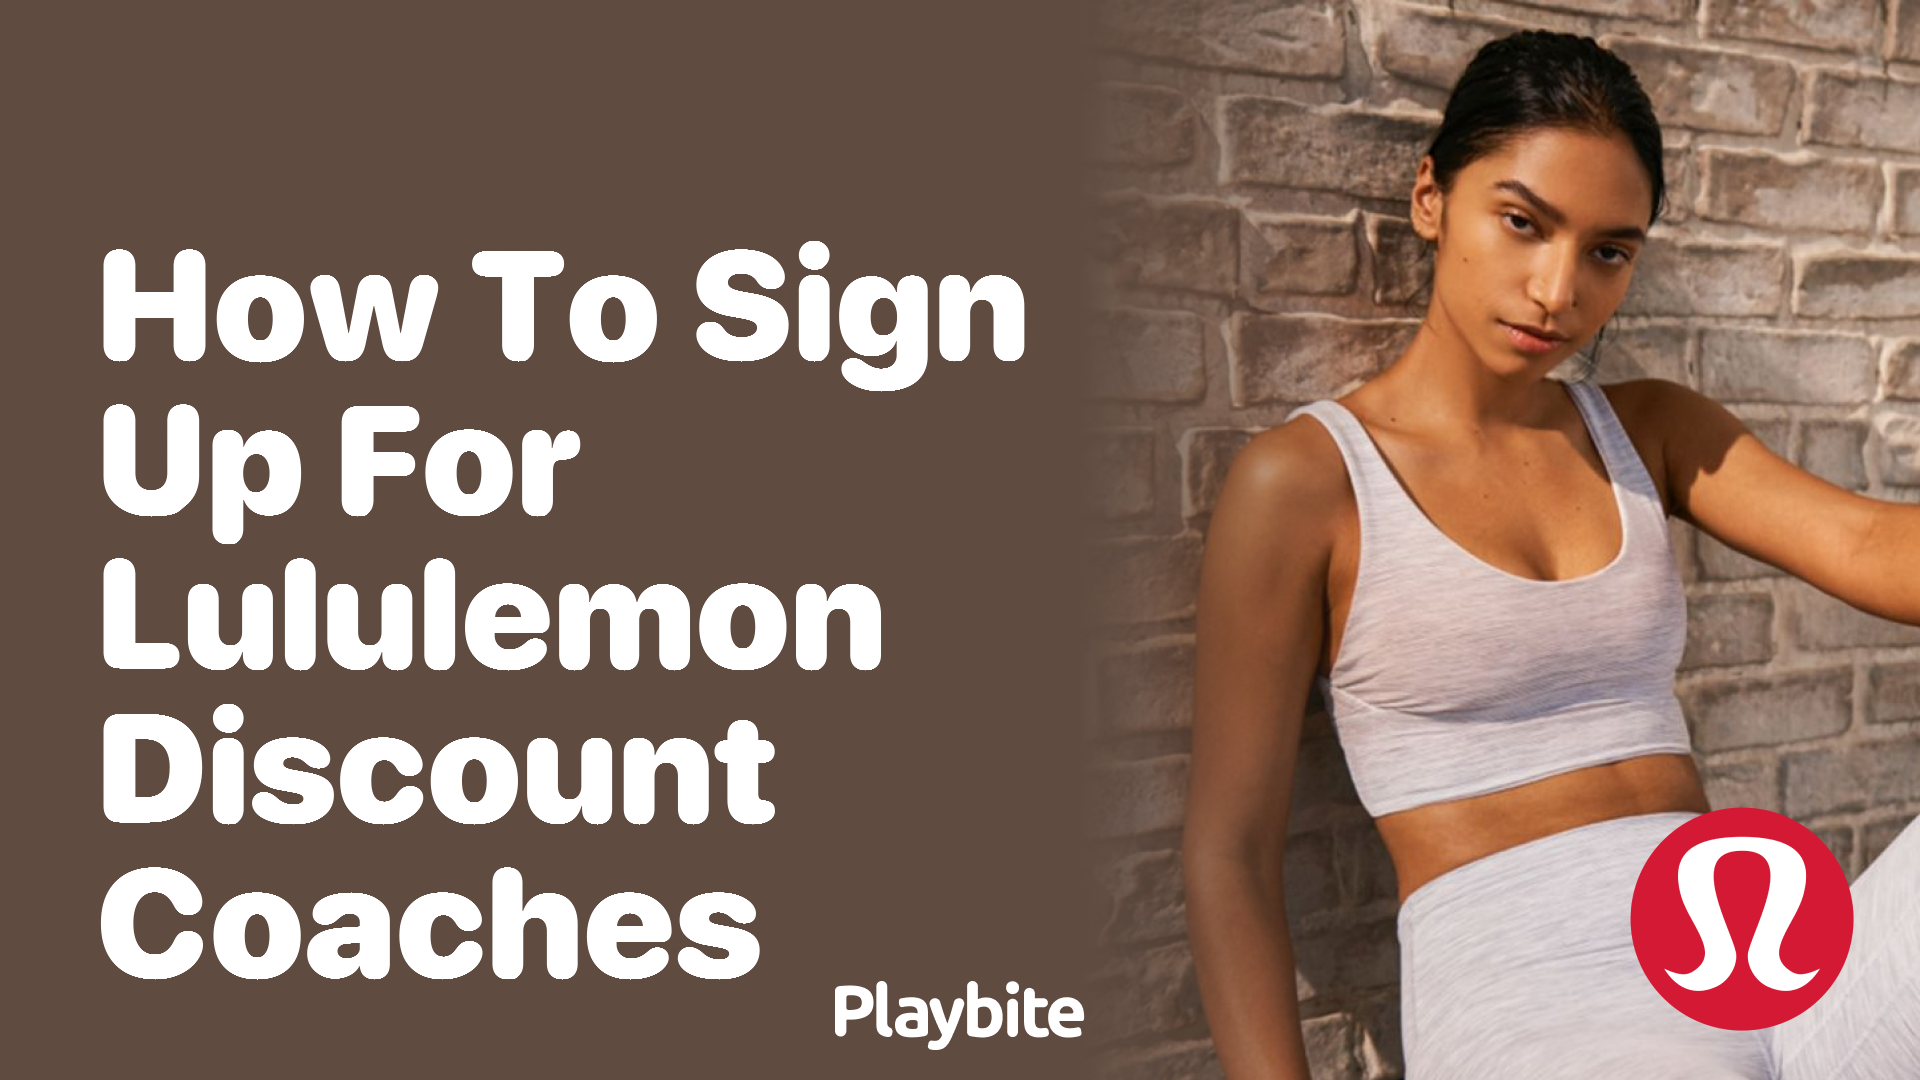 How to Sign Up for Lululemon Discount for Coaches